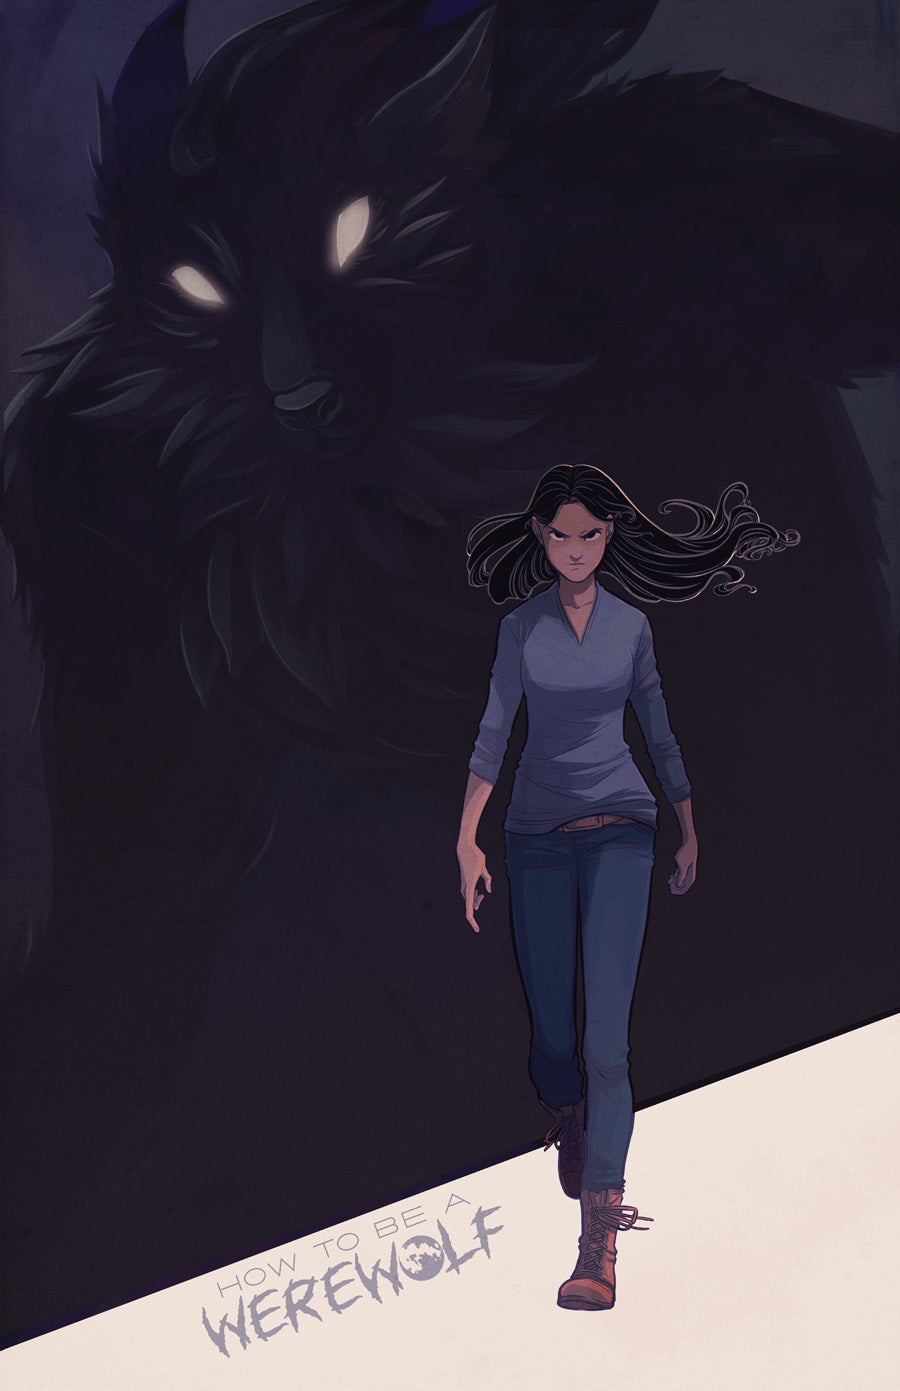 Chapter 6 Cover Print from How To Be a Werewolf - Webcomic Merchandise 